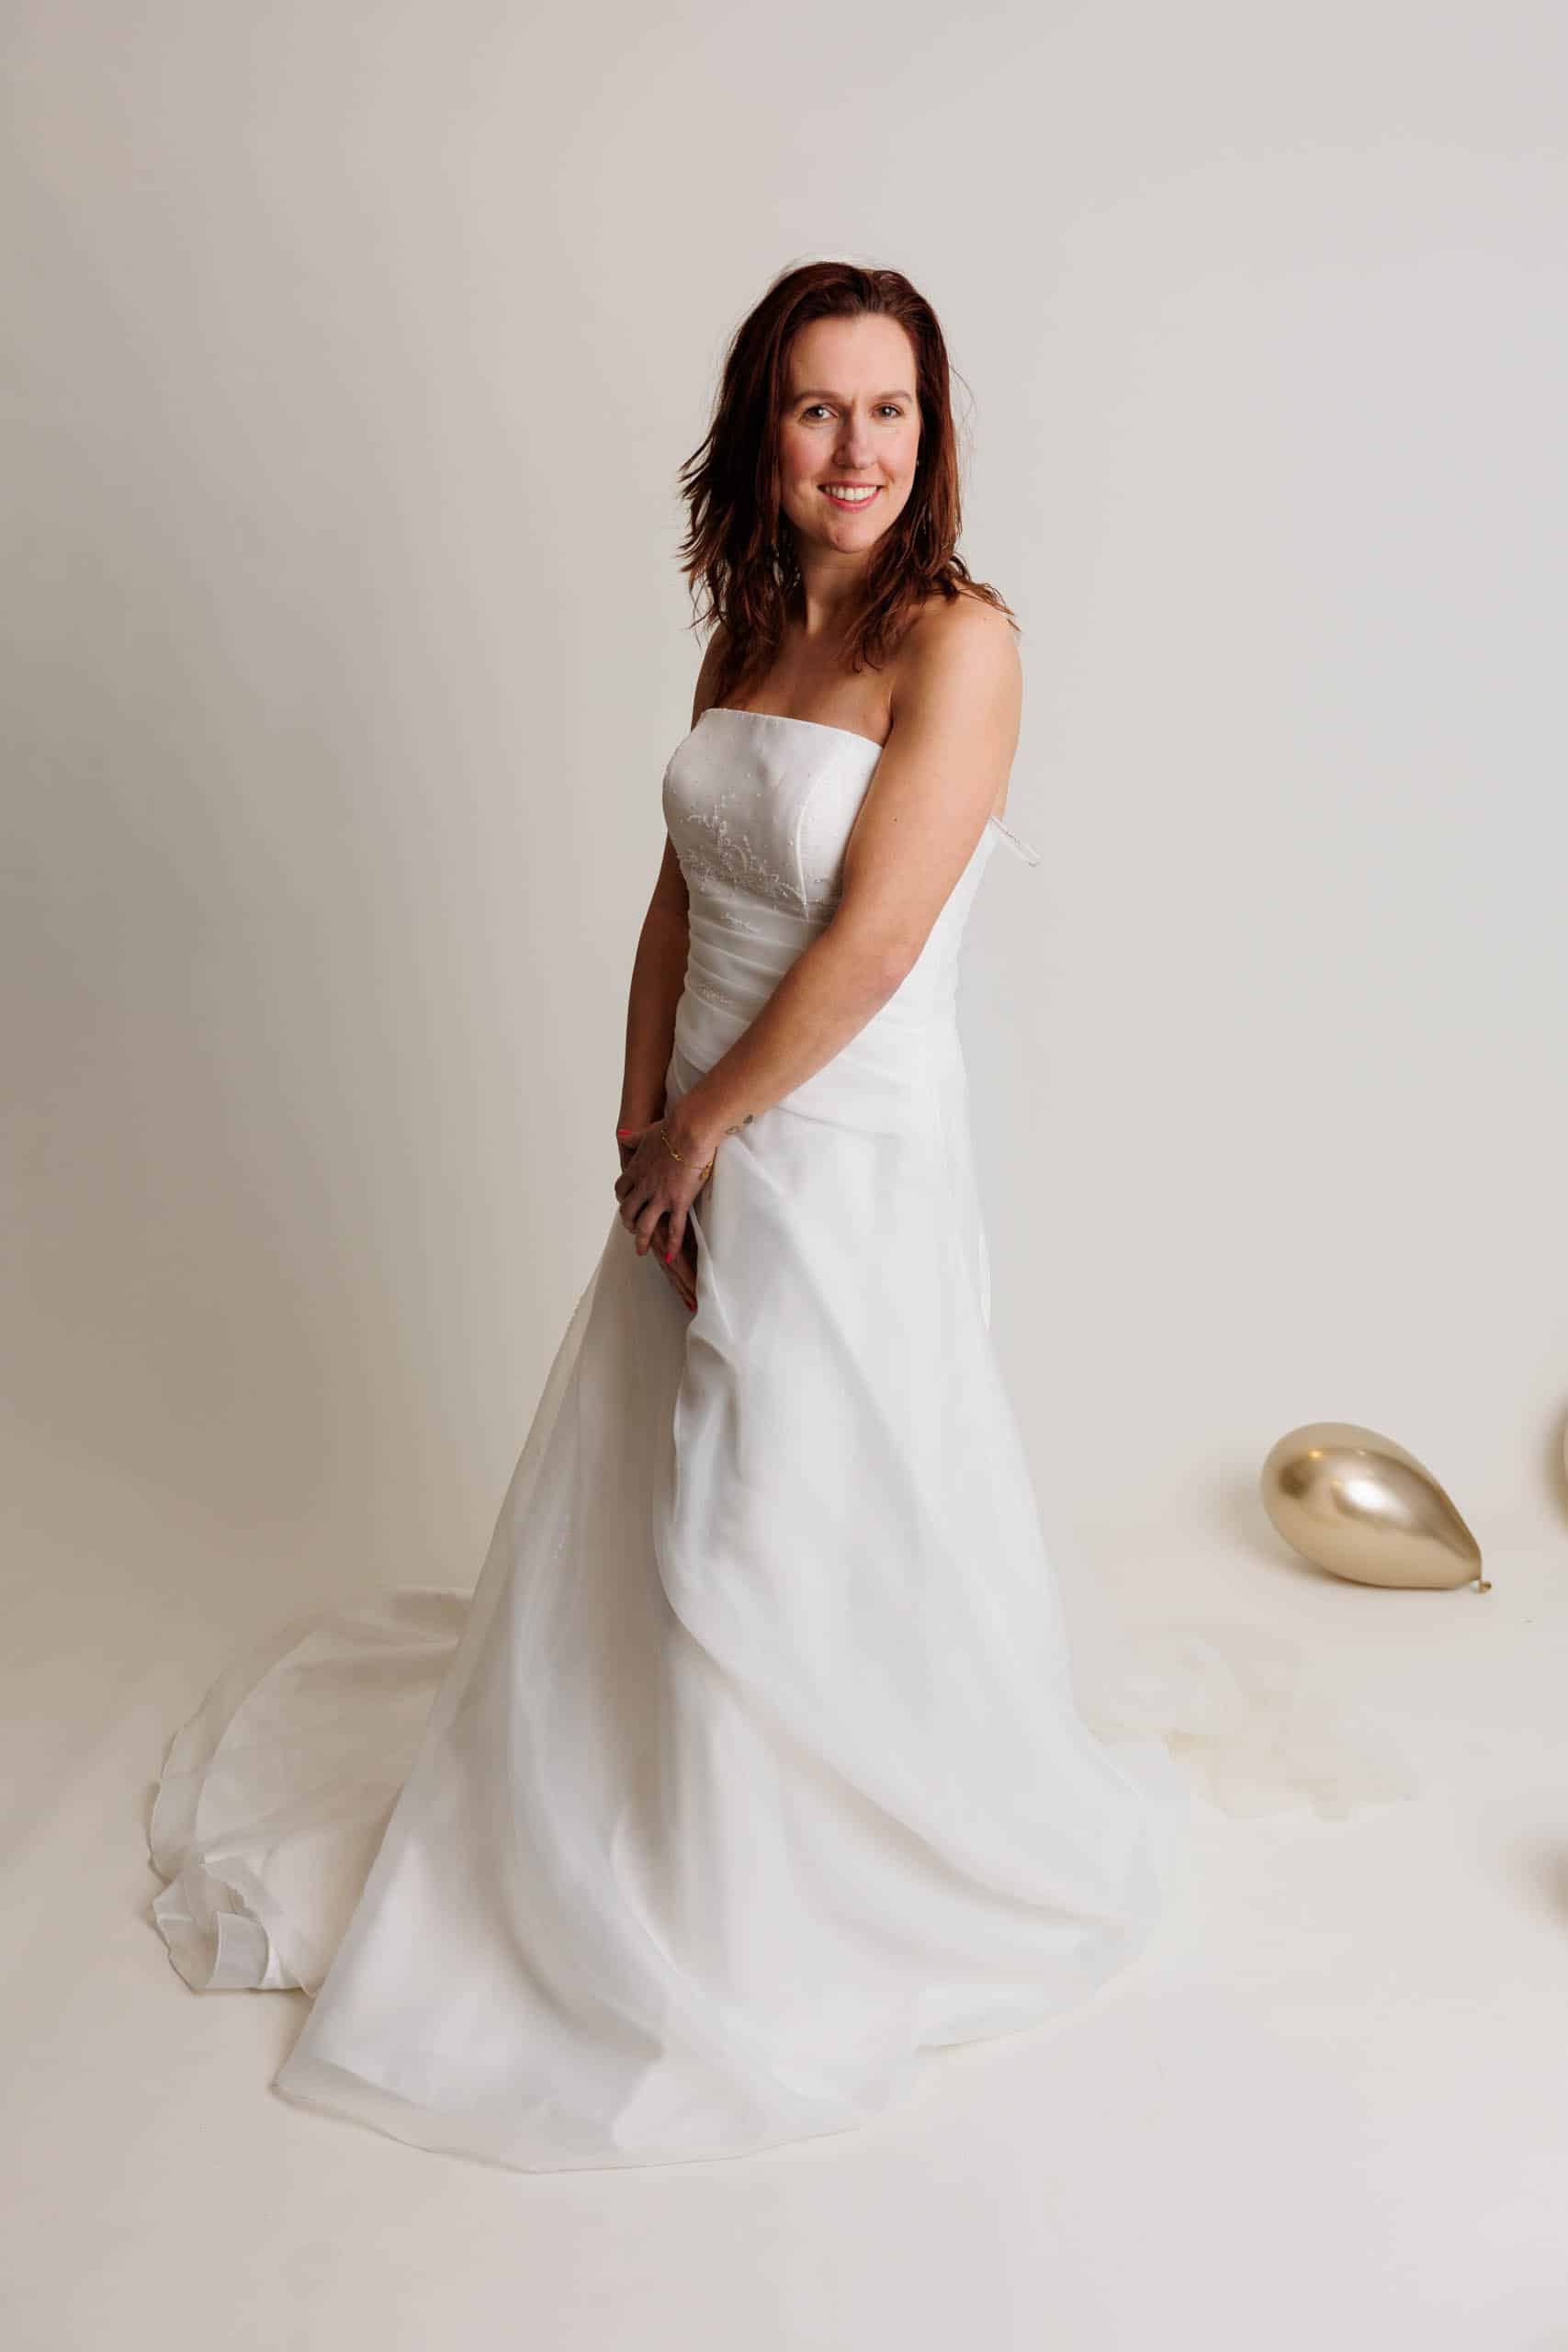 A woman in a wedding dress poses for a photo while trying on wedding dresses for fun.